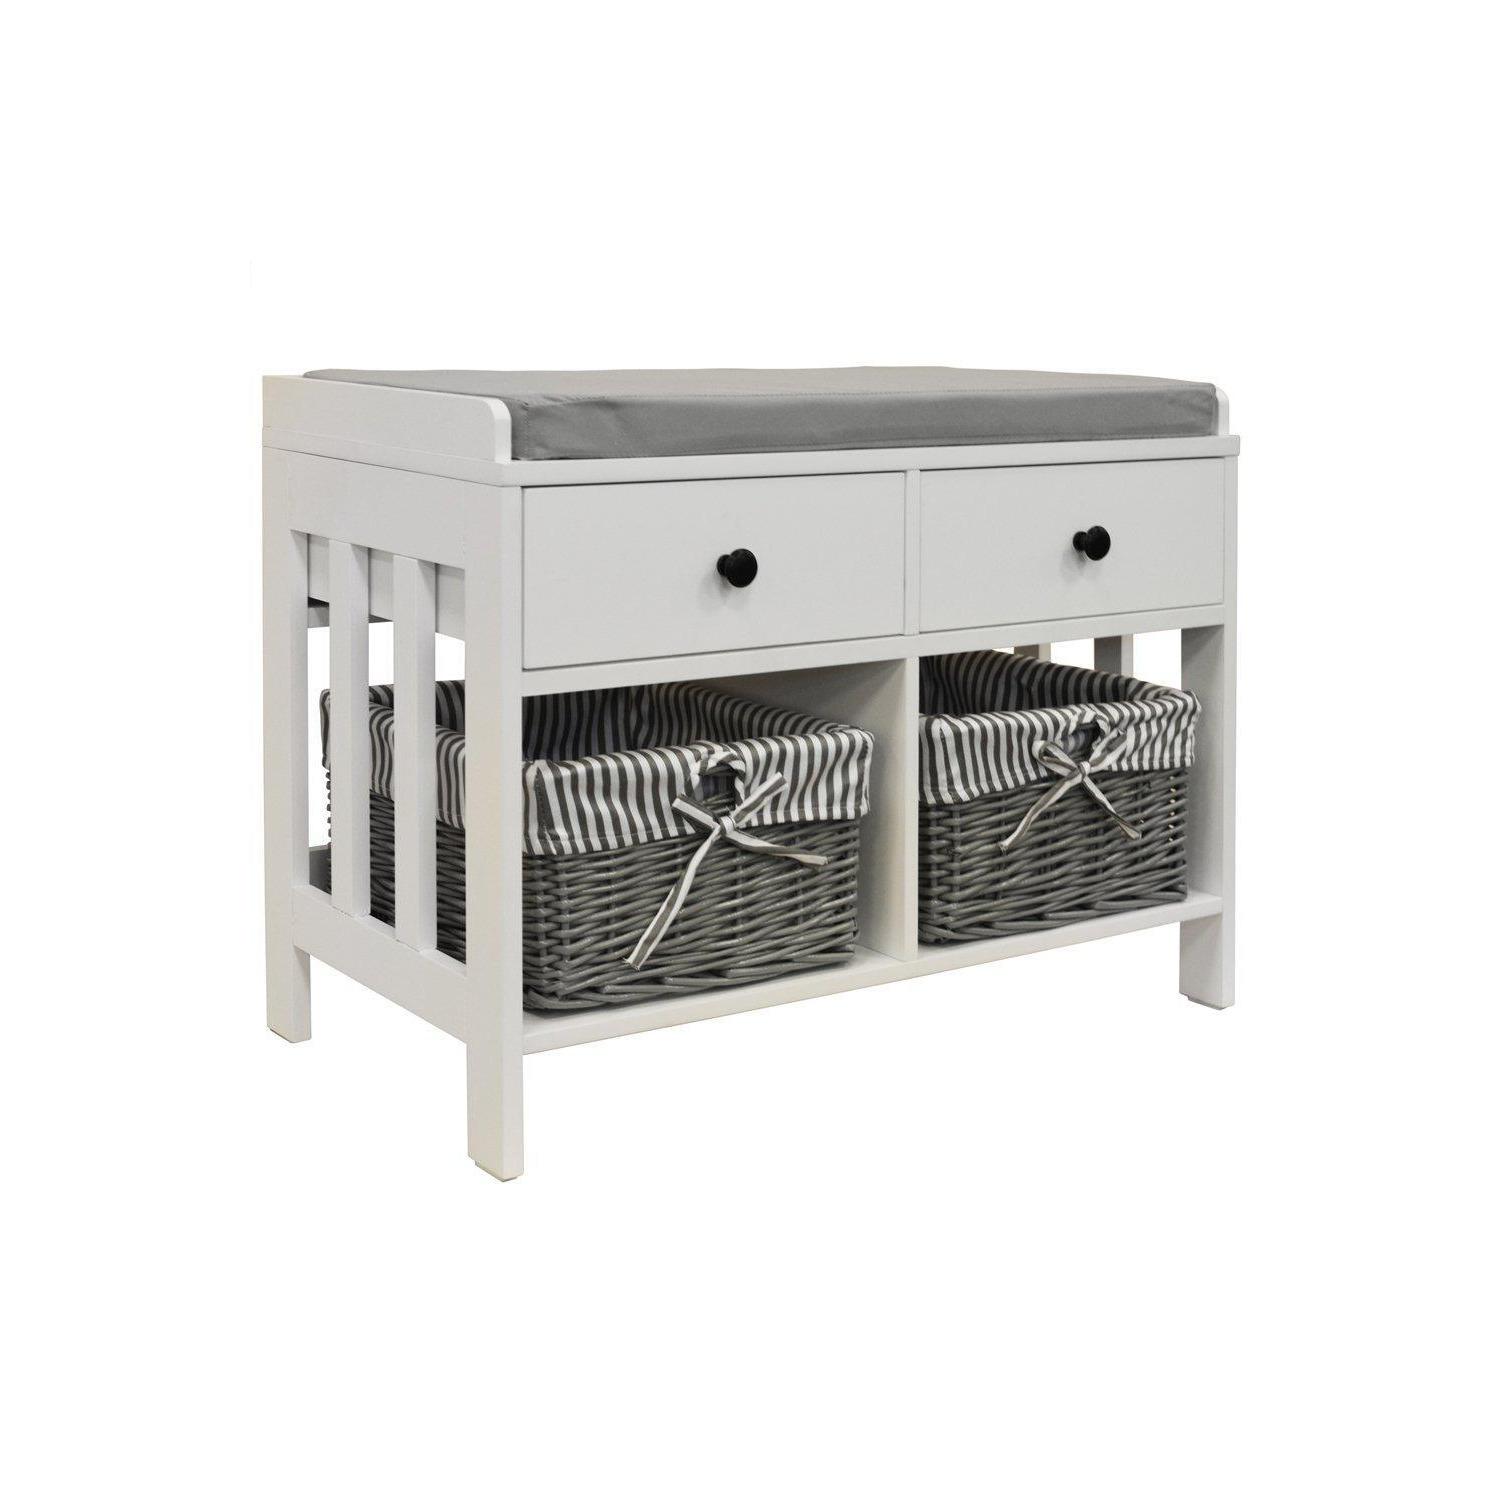 Double -  Storage / Shoe Storage Bench With Two Drawers And Baskets - White / Grey - image 1